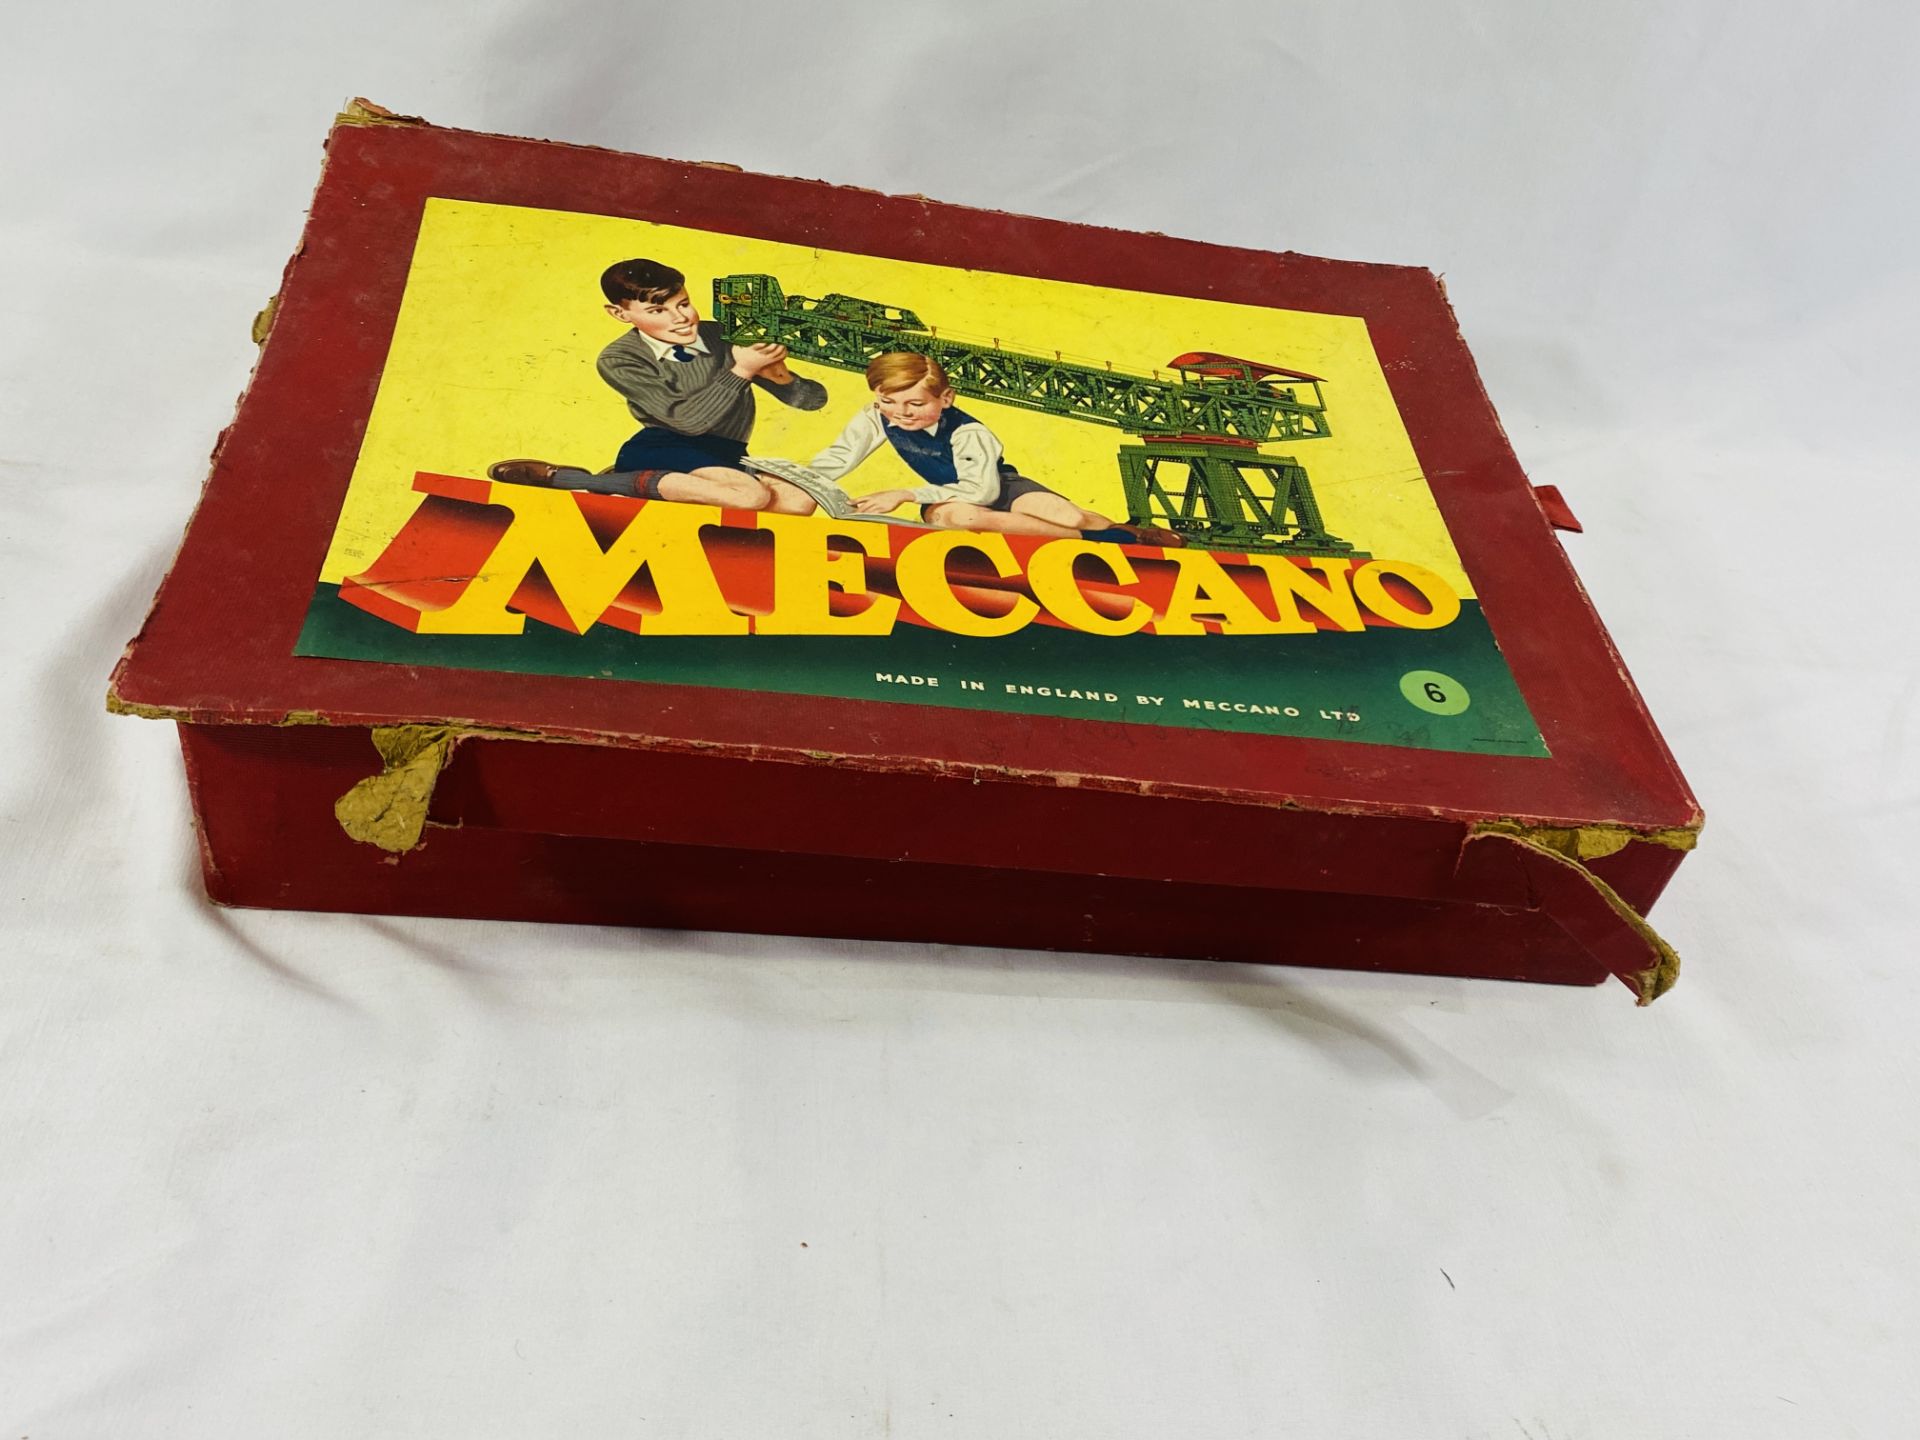 A box containing a quantity of Meccano and instruction books